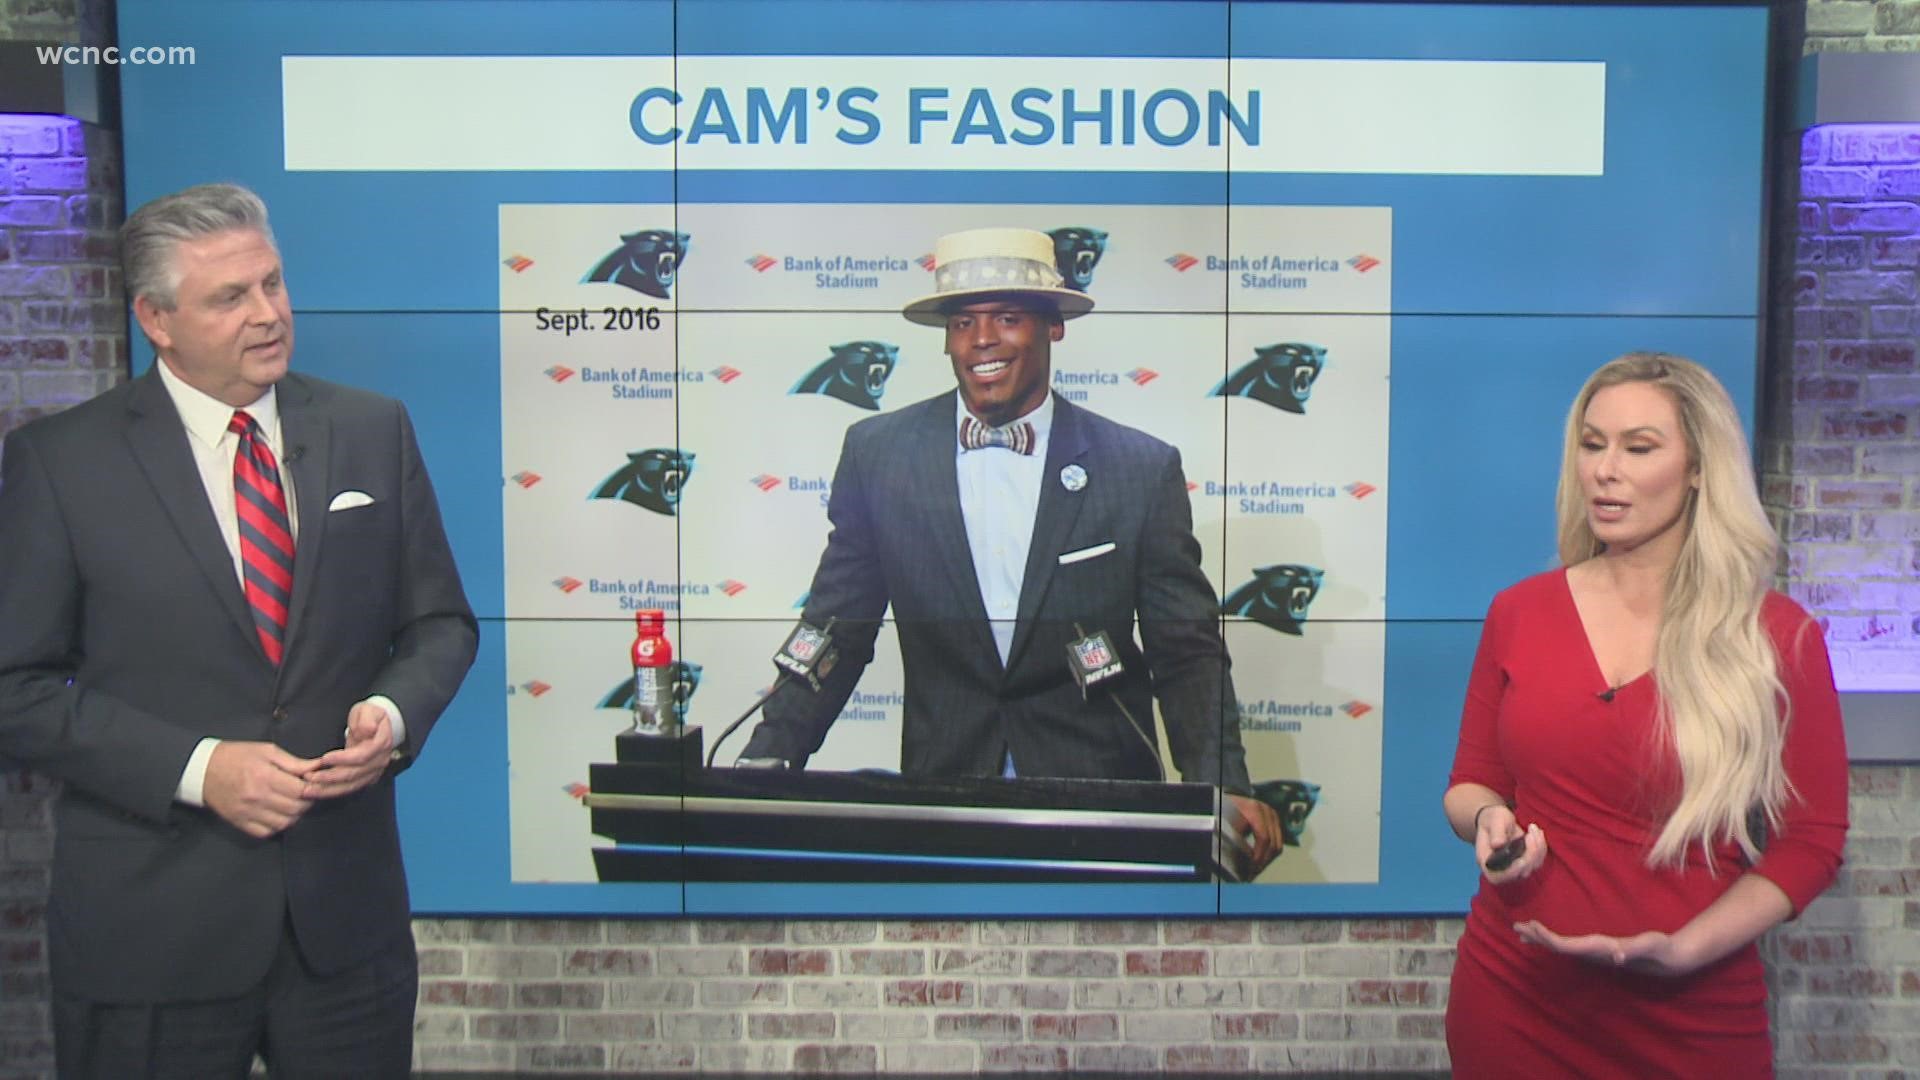 In celebration of Cam Newton's return to the Queen City, WCNC takes a look at some of the player's most notable looks over the years.